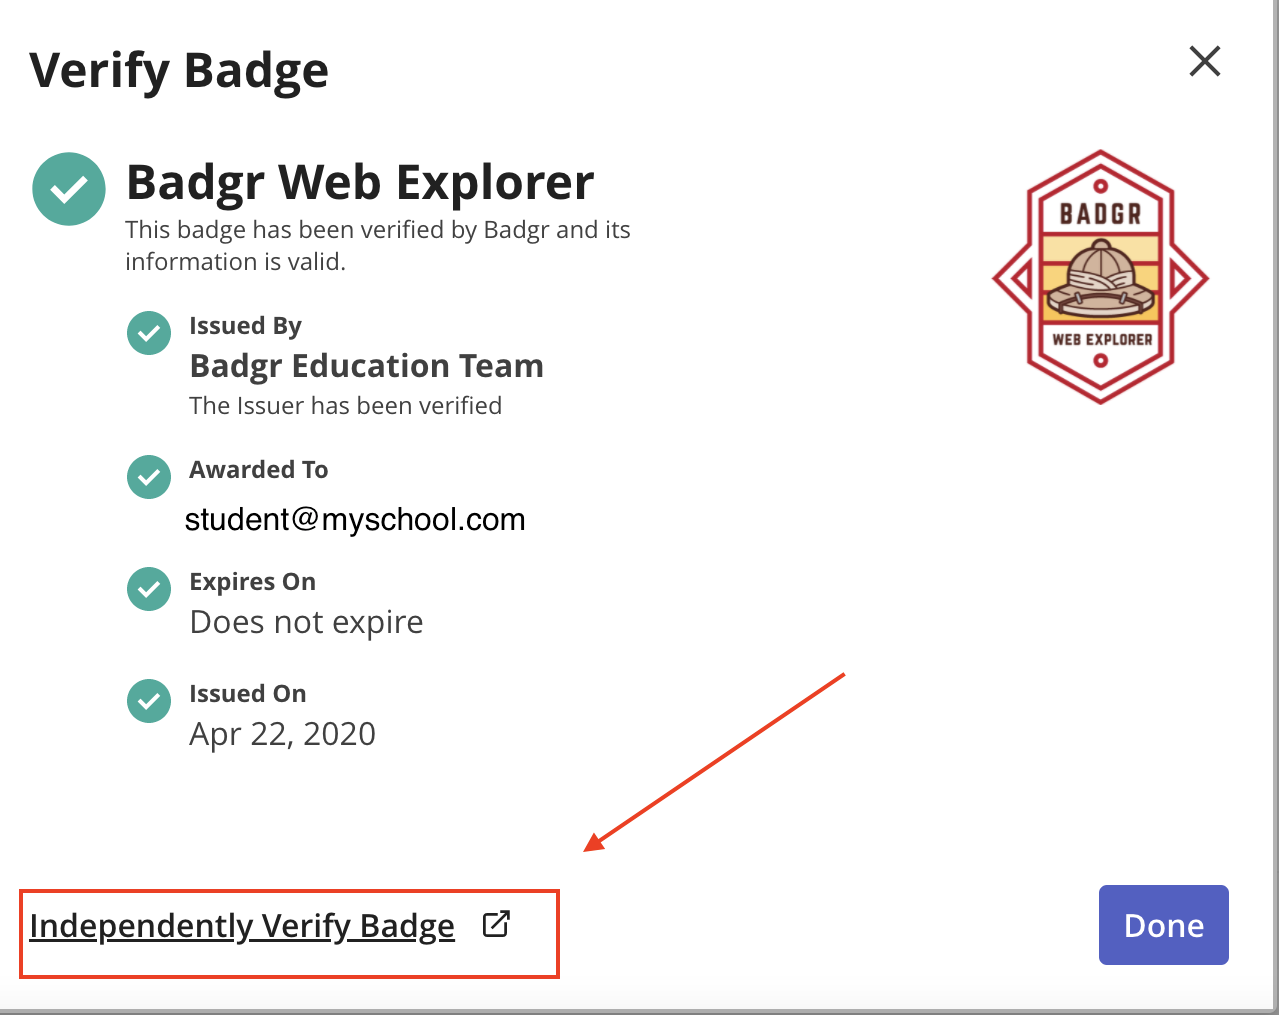 Independently verify badge